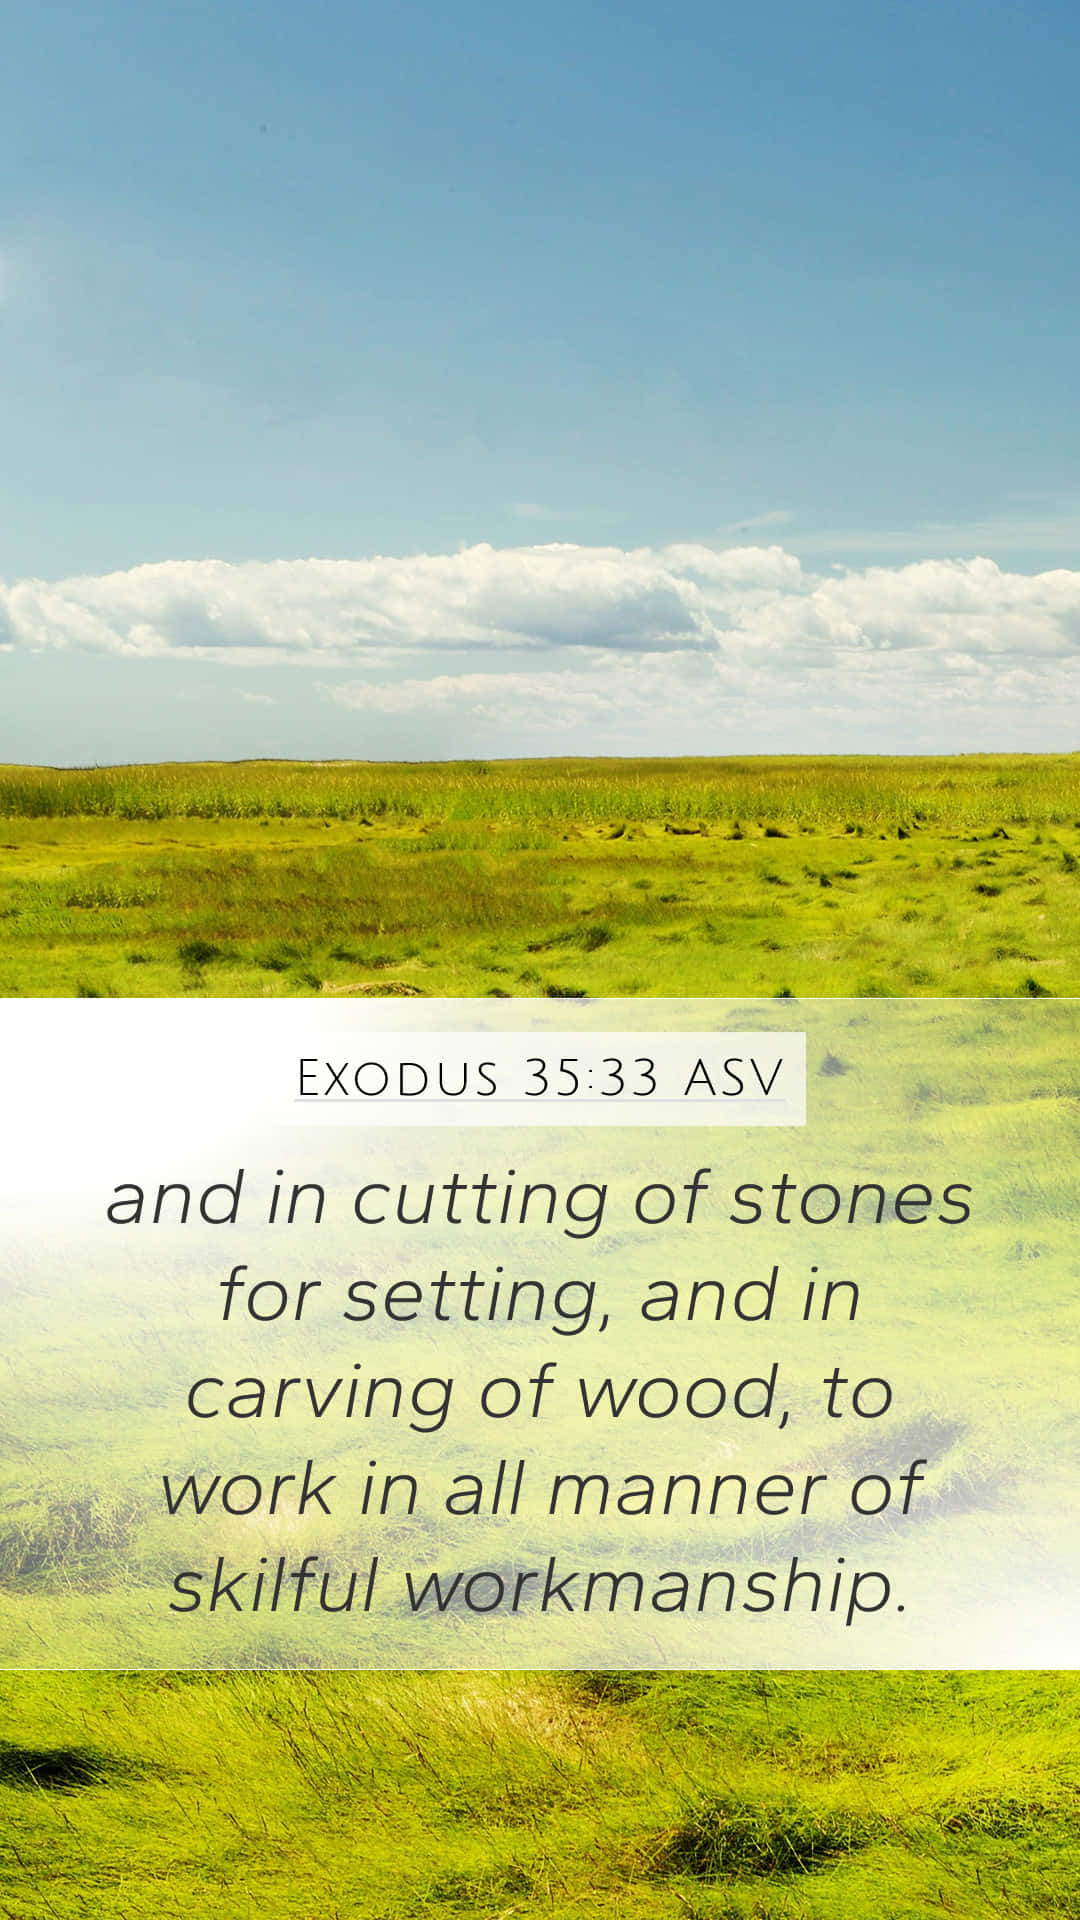 Cutting Stones And Carving Of Woods Bible Verse Wallpaper